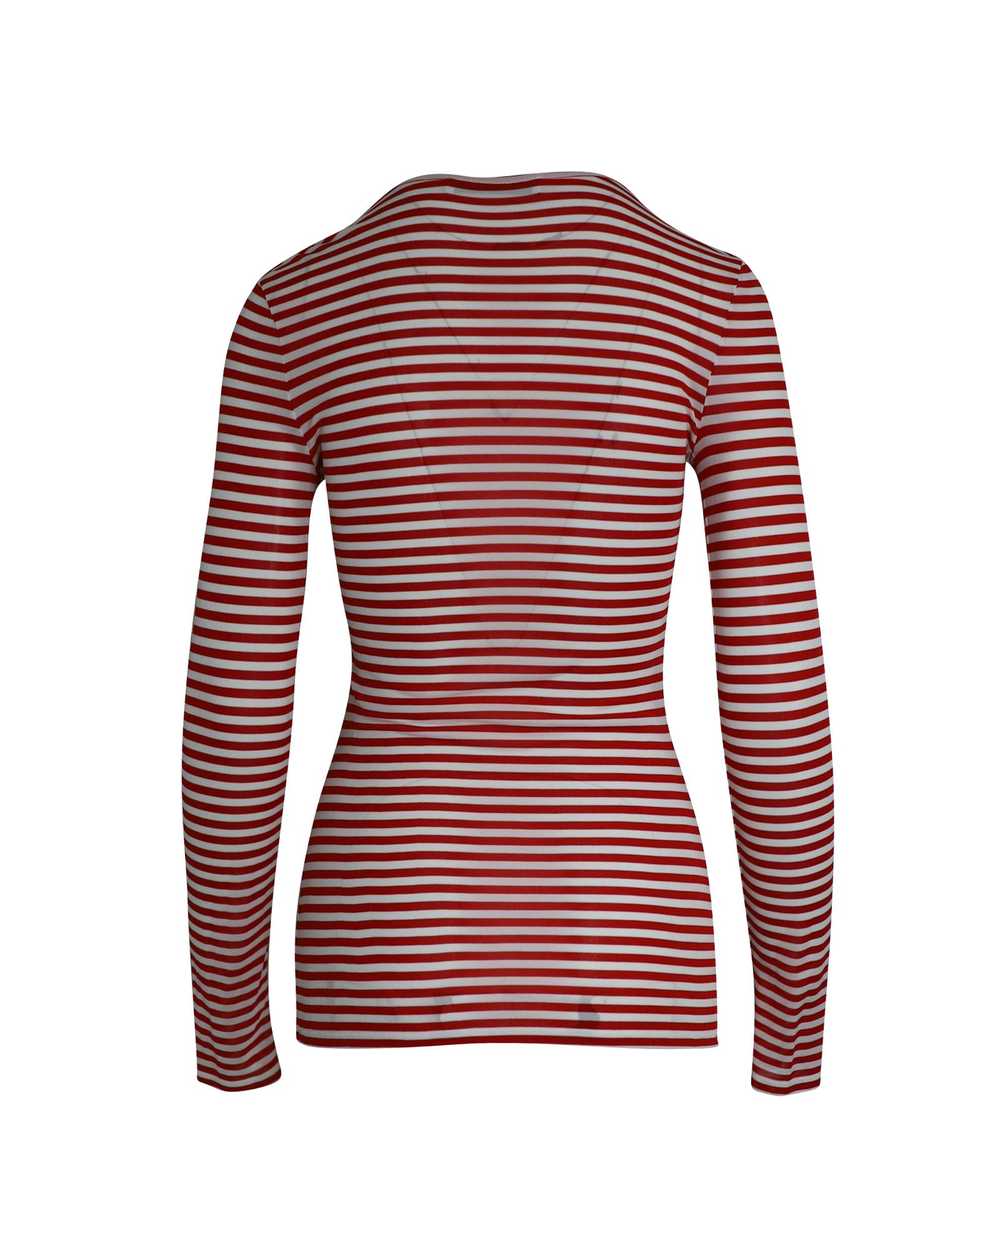 Product Details Max Mara Red and White Striped Lo… - image 3